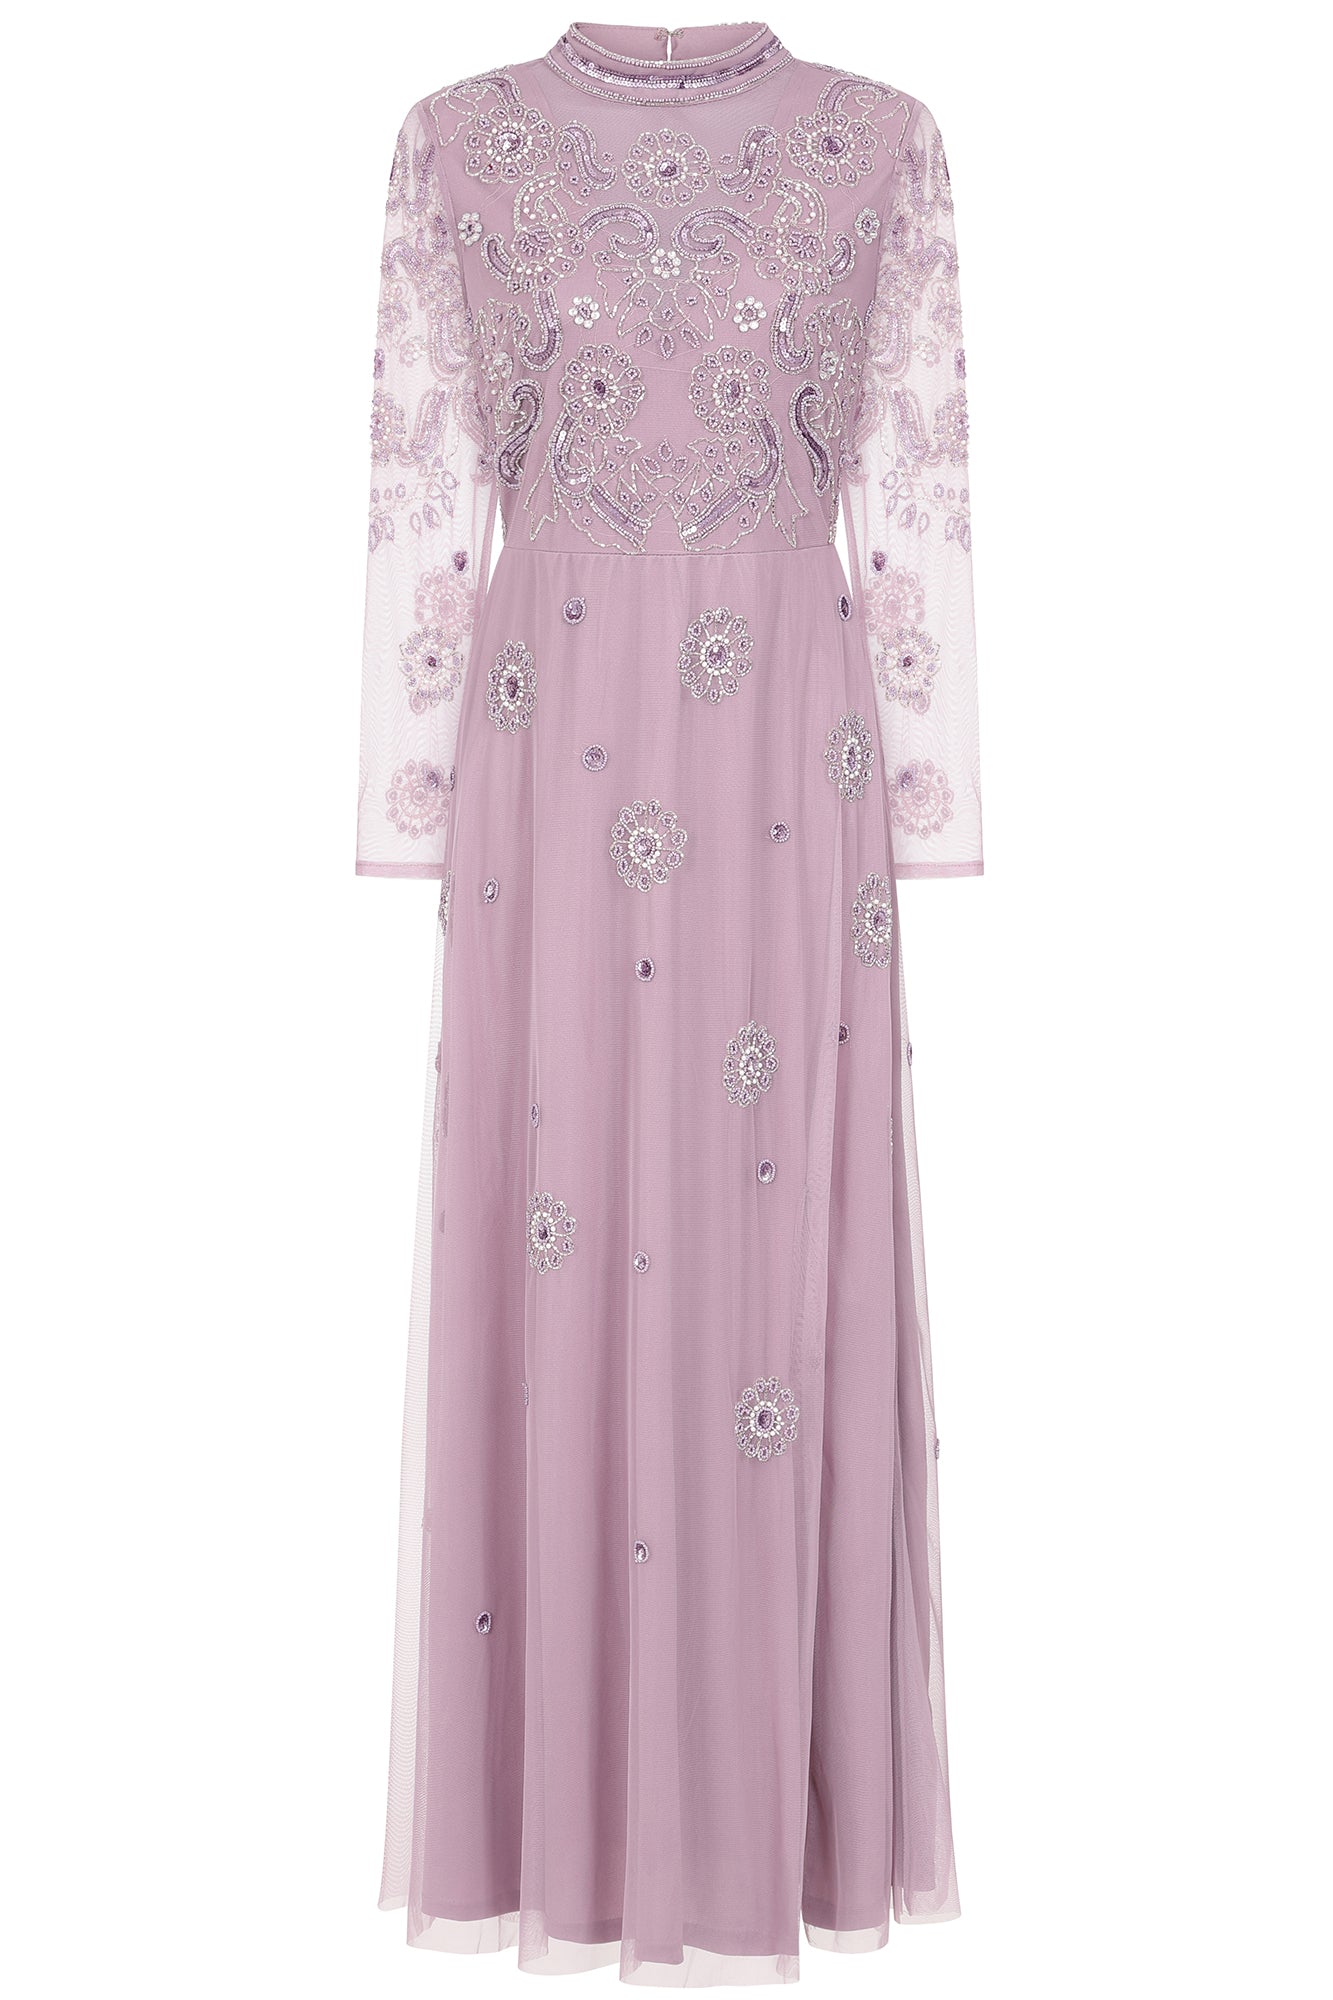 Women’s Pink / Purple Sabina Embellished Maxi Dress - Lilac Extra Small Frock and Frill